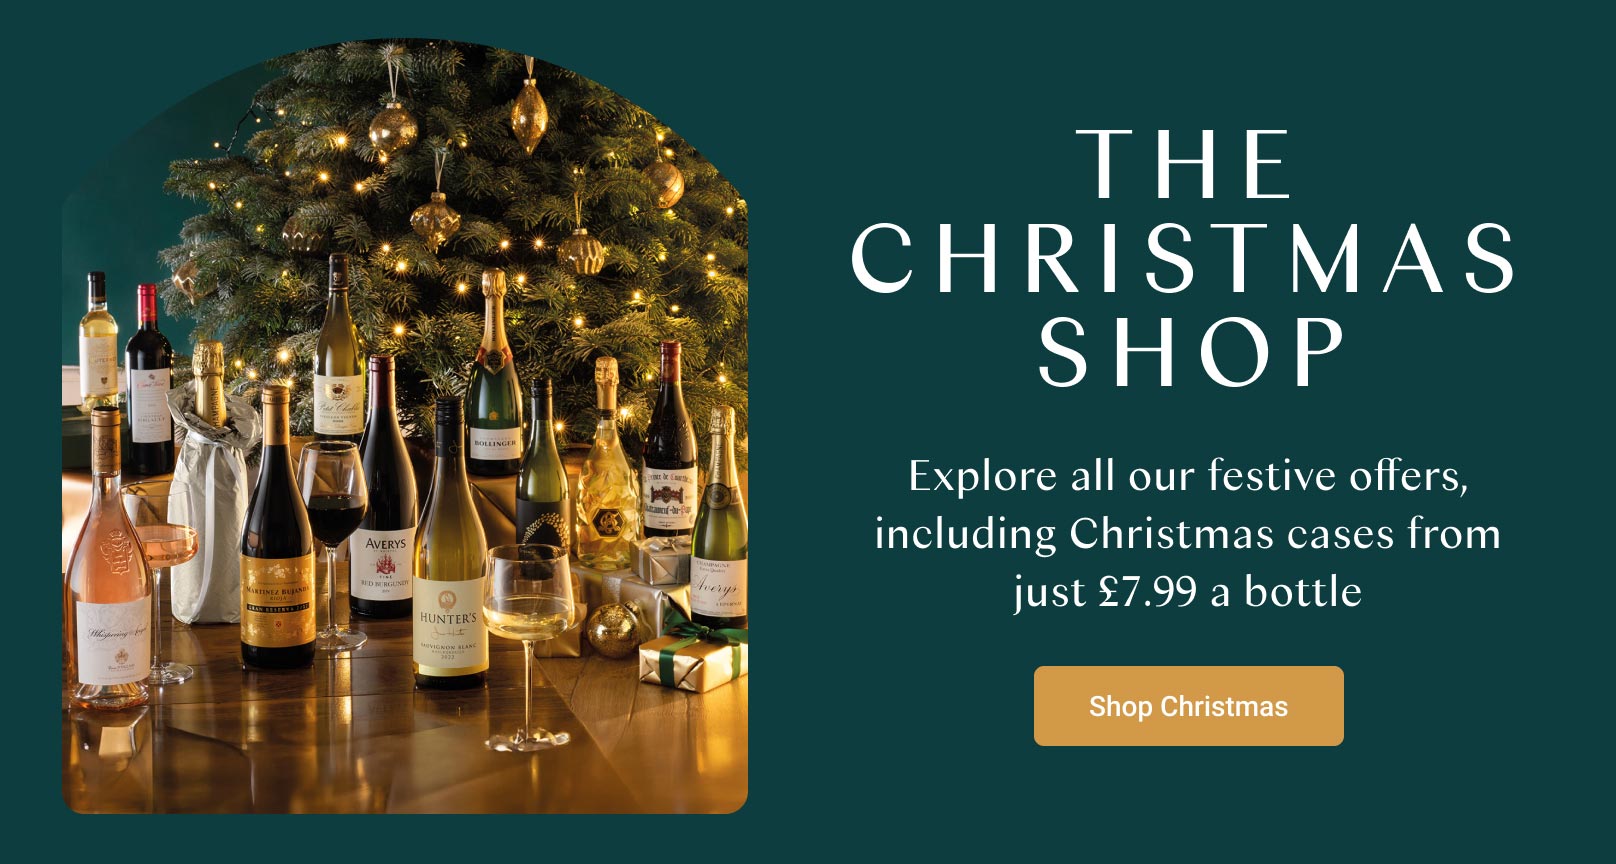 Explore all of our festive offers